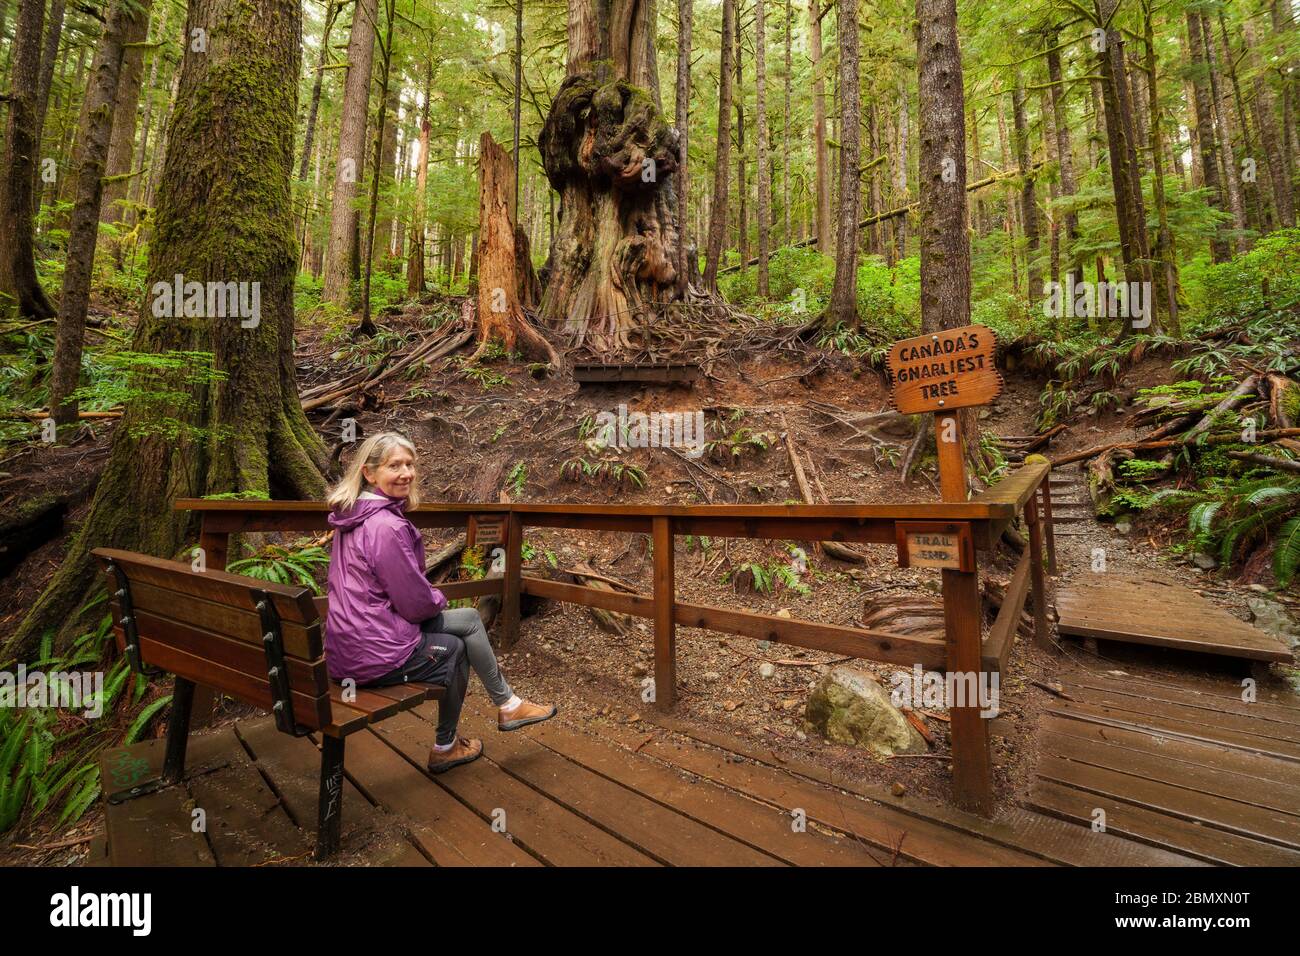 Woman on viewing platform at Canada's gnarliest tree in WestCoast rain forest at Avatar Grove-Port Renfrew, Britisih Columbia, Canada. Stock Photo